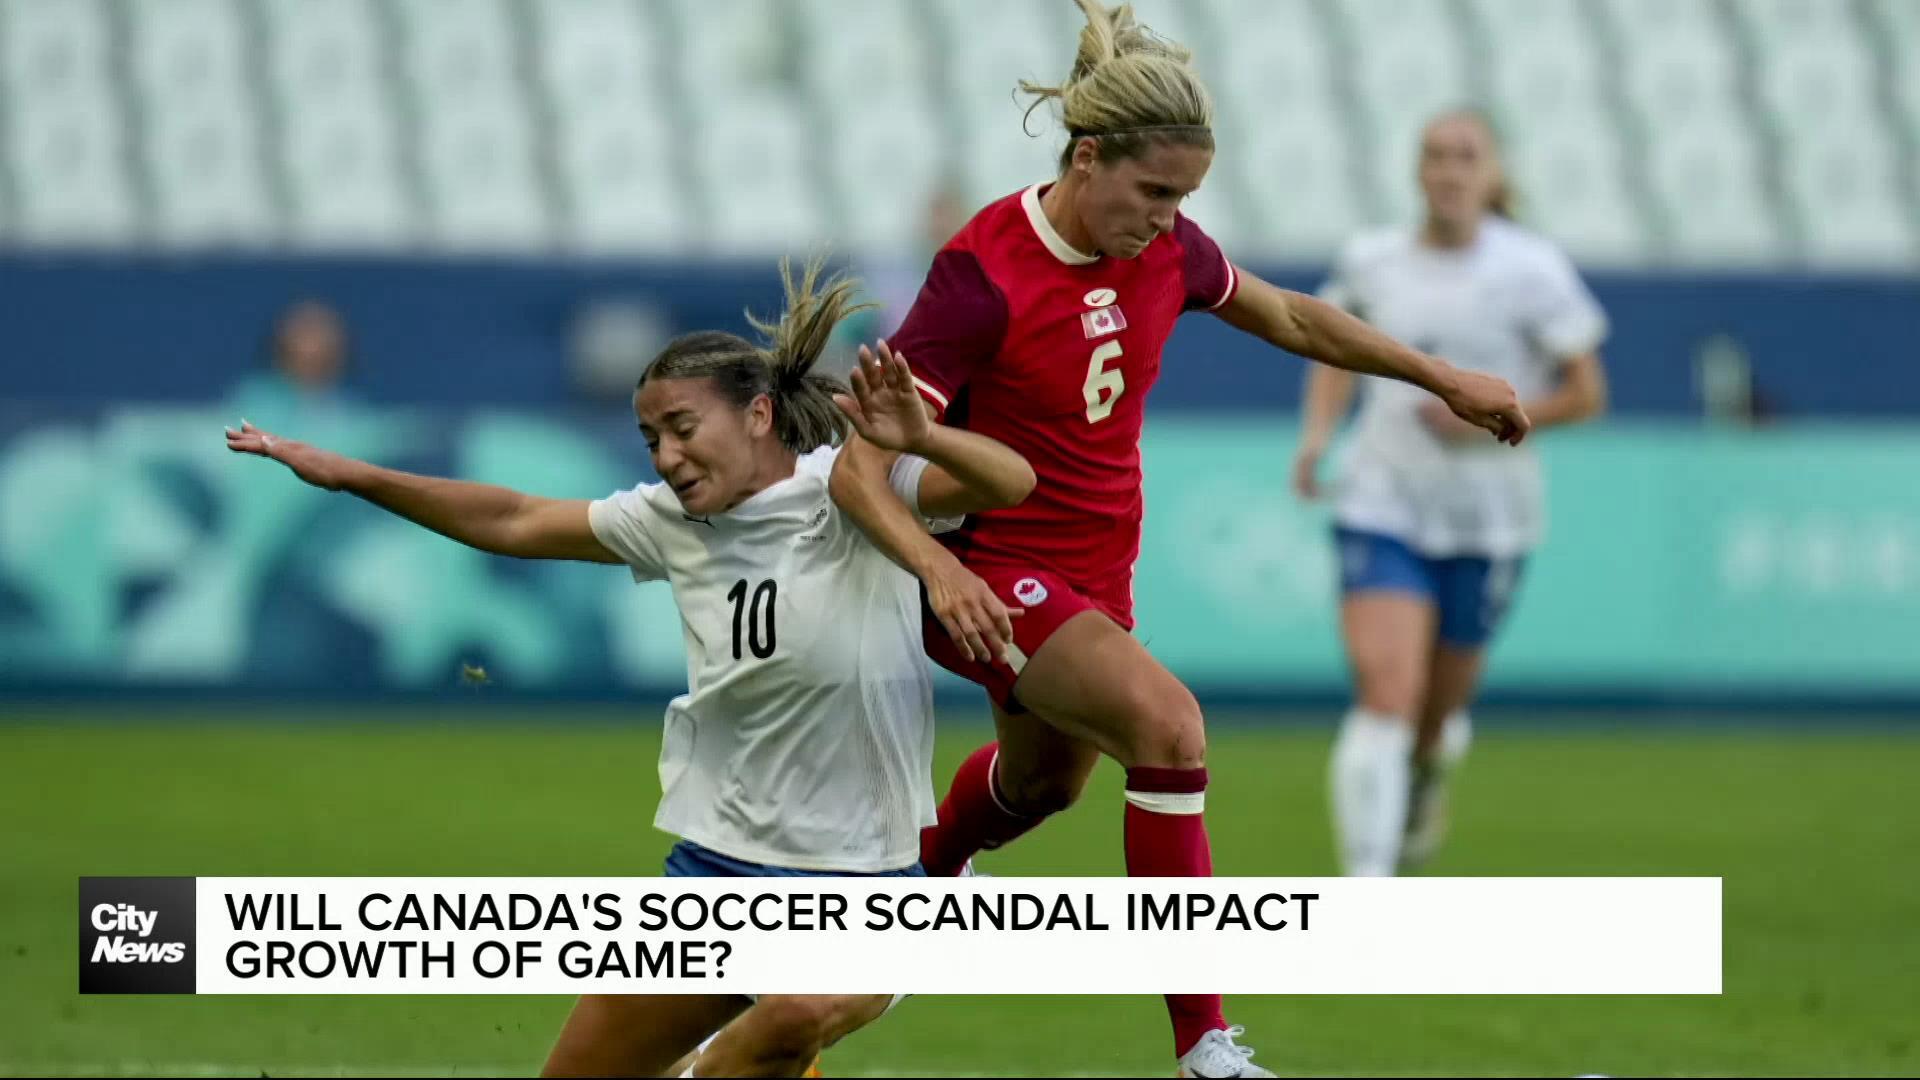 Will Canada’s soccer scandal impact growth of game?